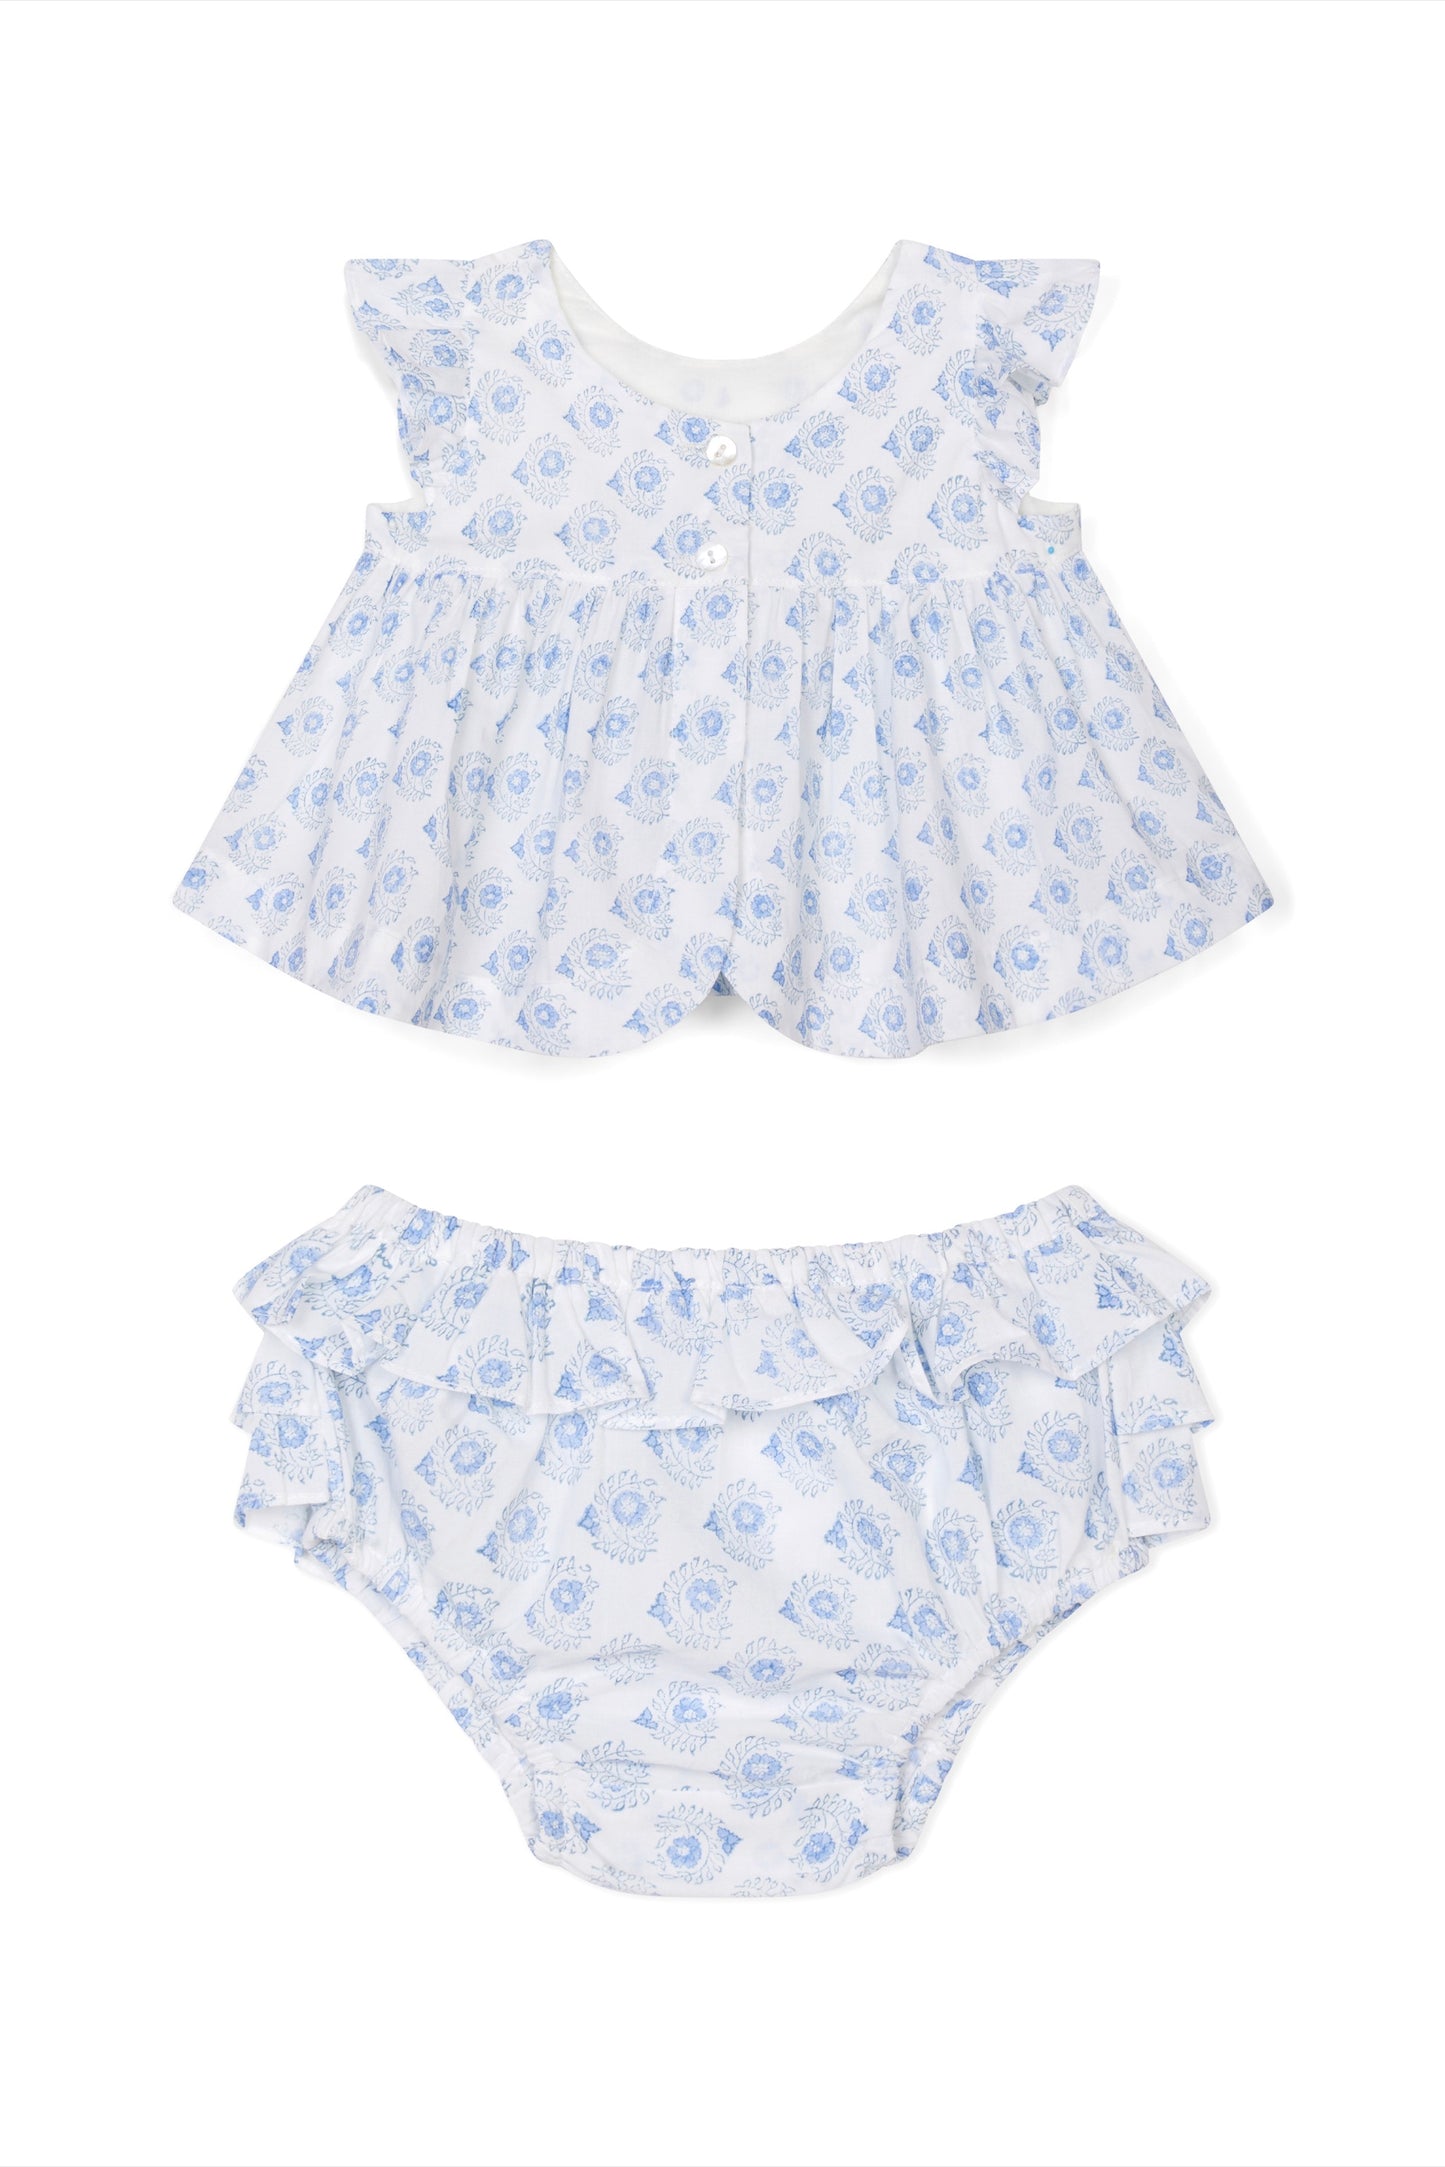 Blue Motif Top and Bloomers Set